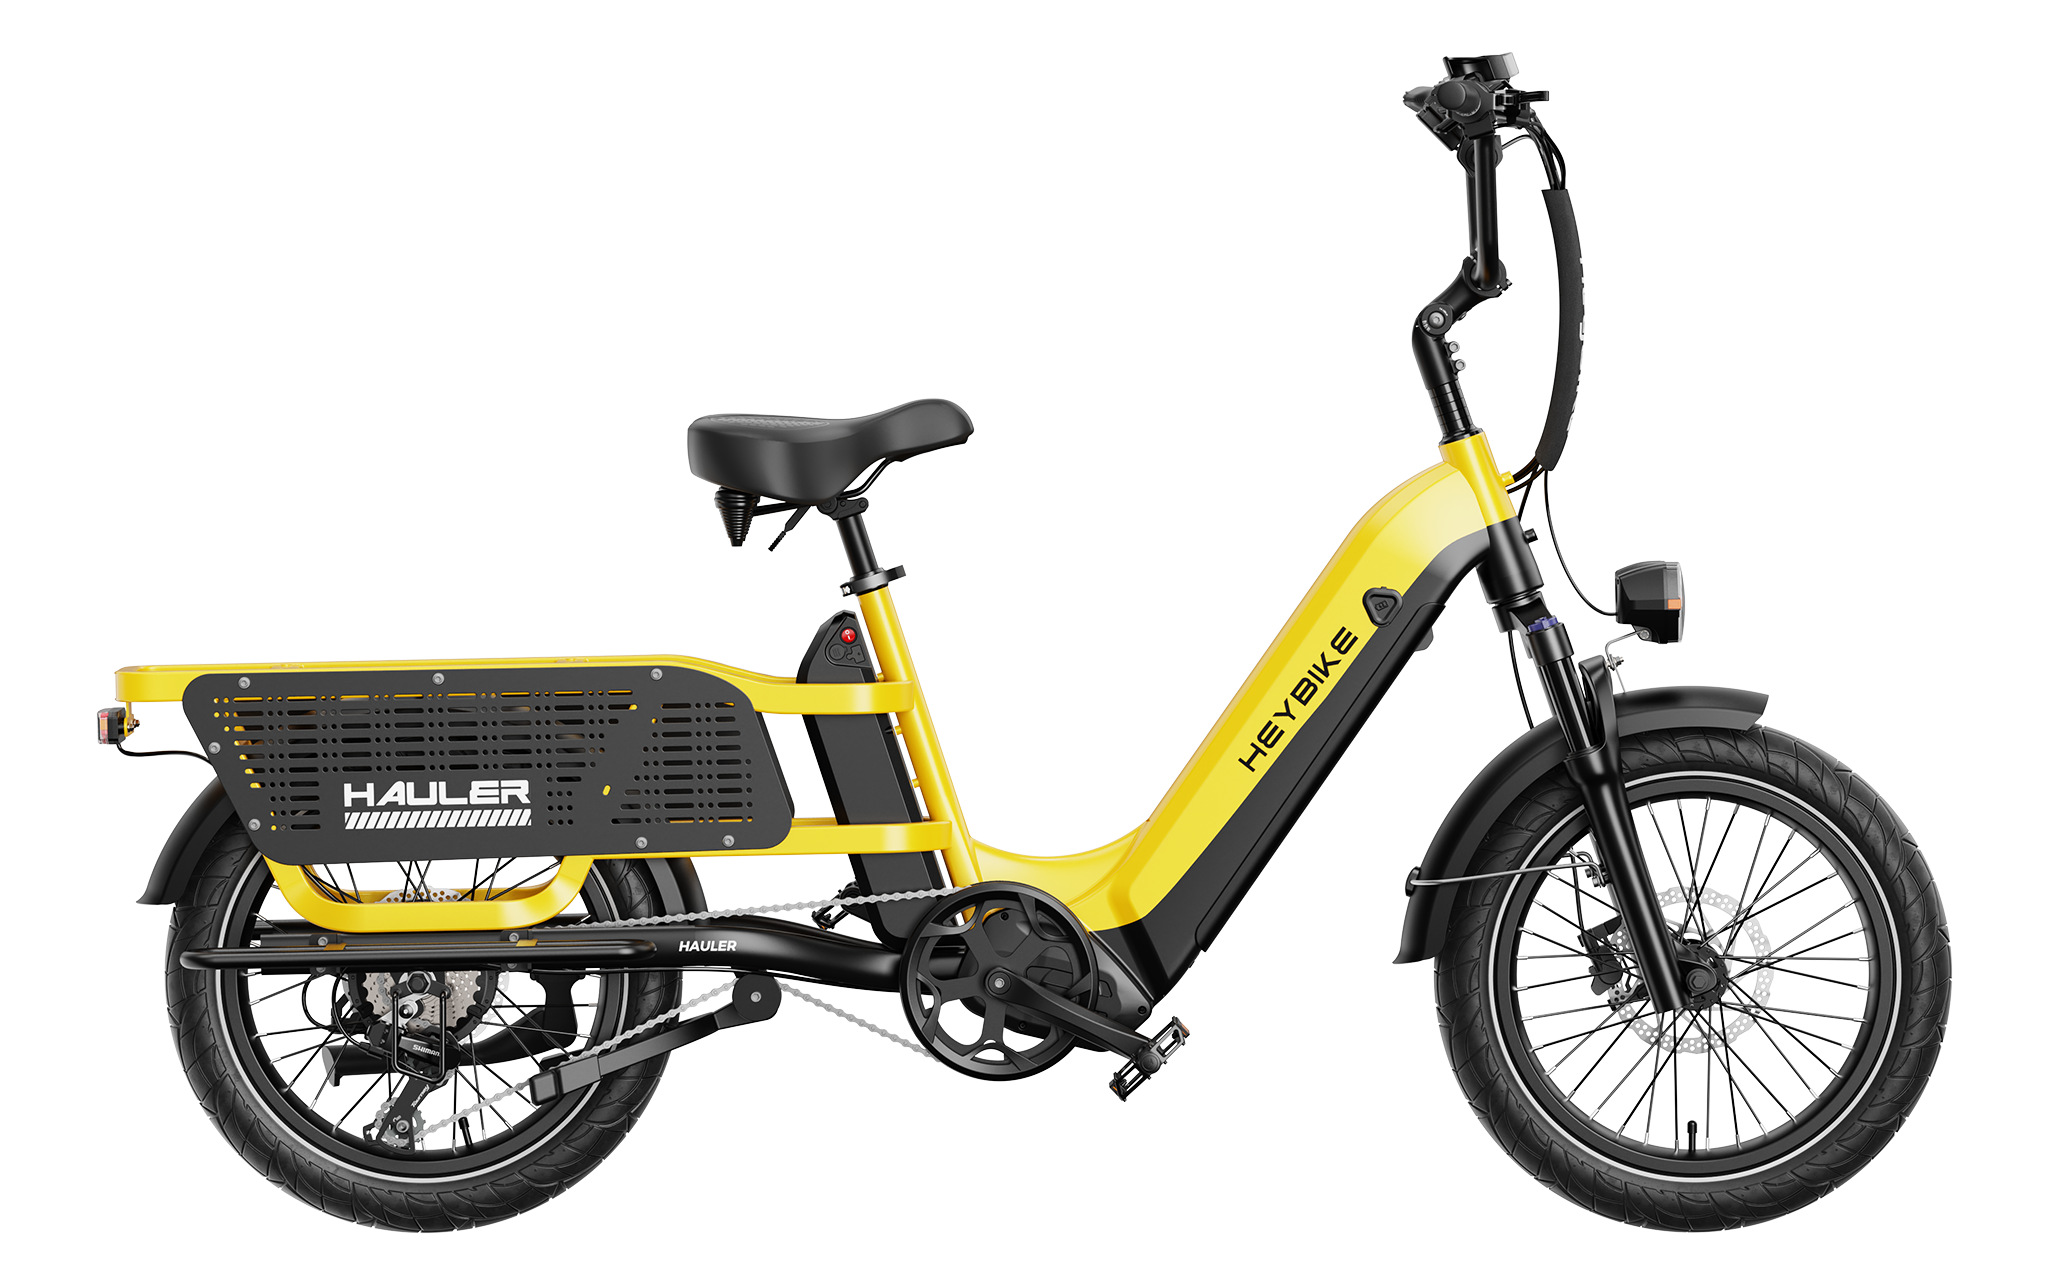 Hauler - Electric cargo ebike with dual battery, yellow